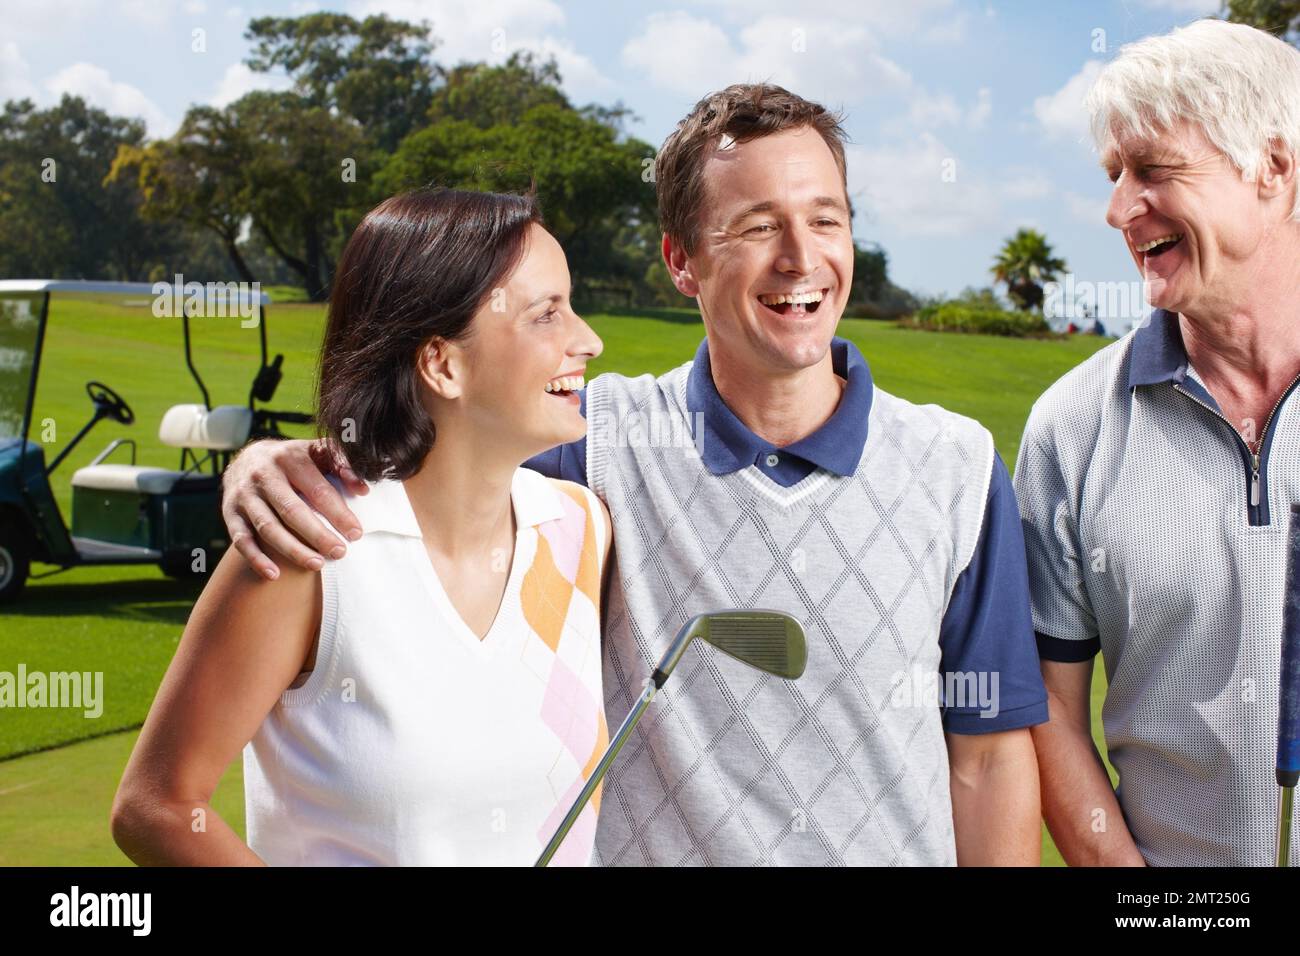 Enjoying a days golf together. Smiling golfing companions on the green with their golf cart in the background. Stock Photo